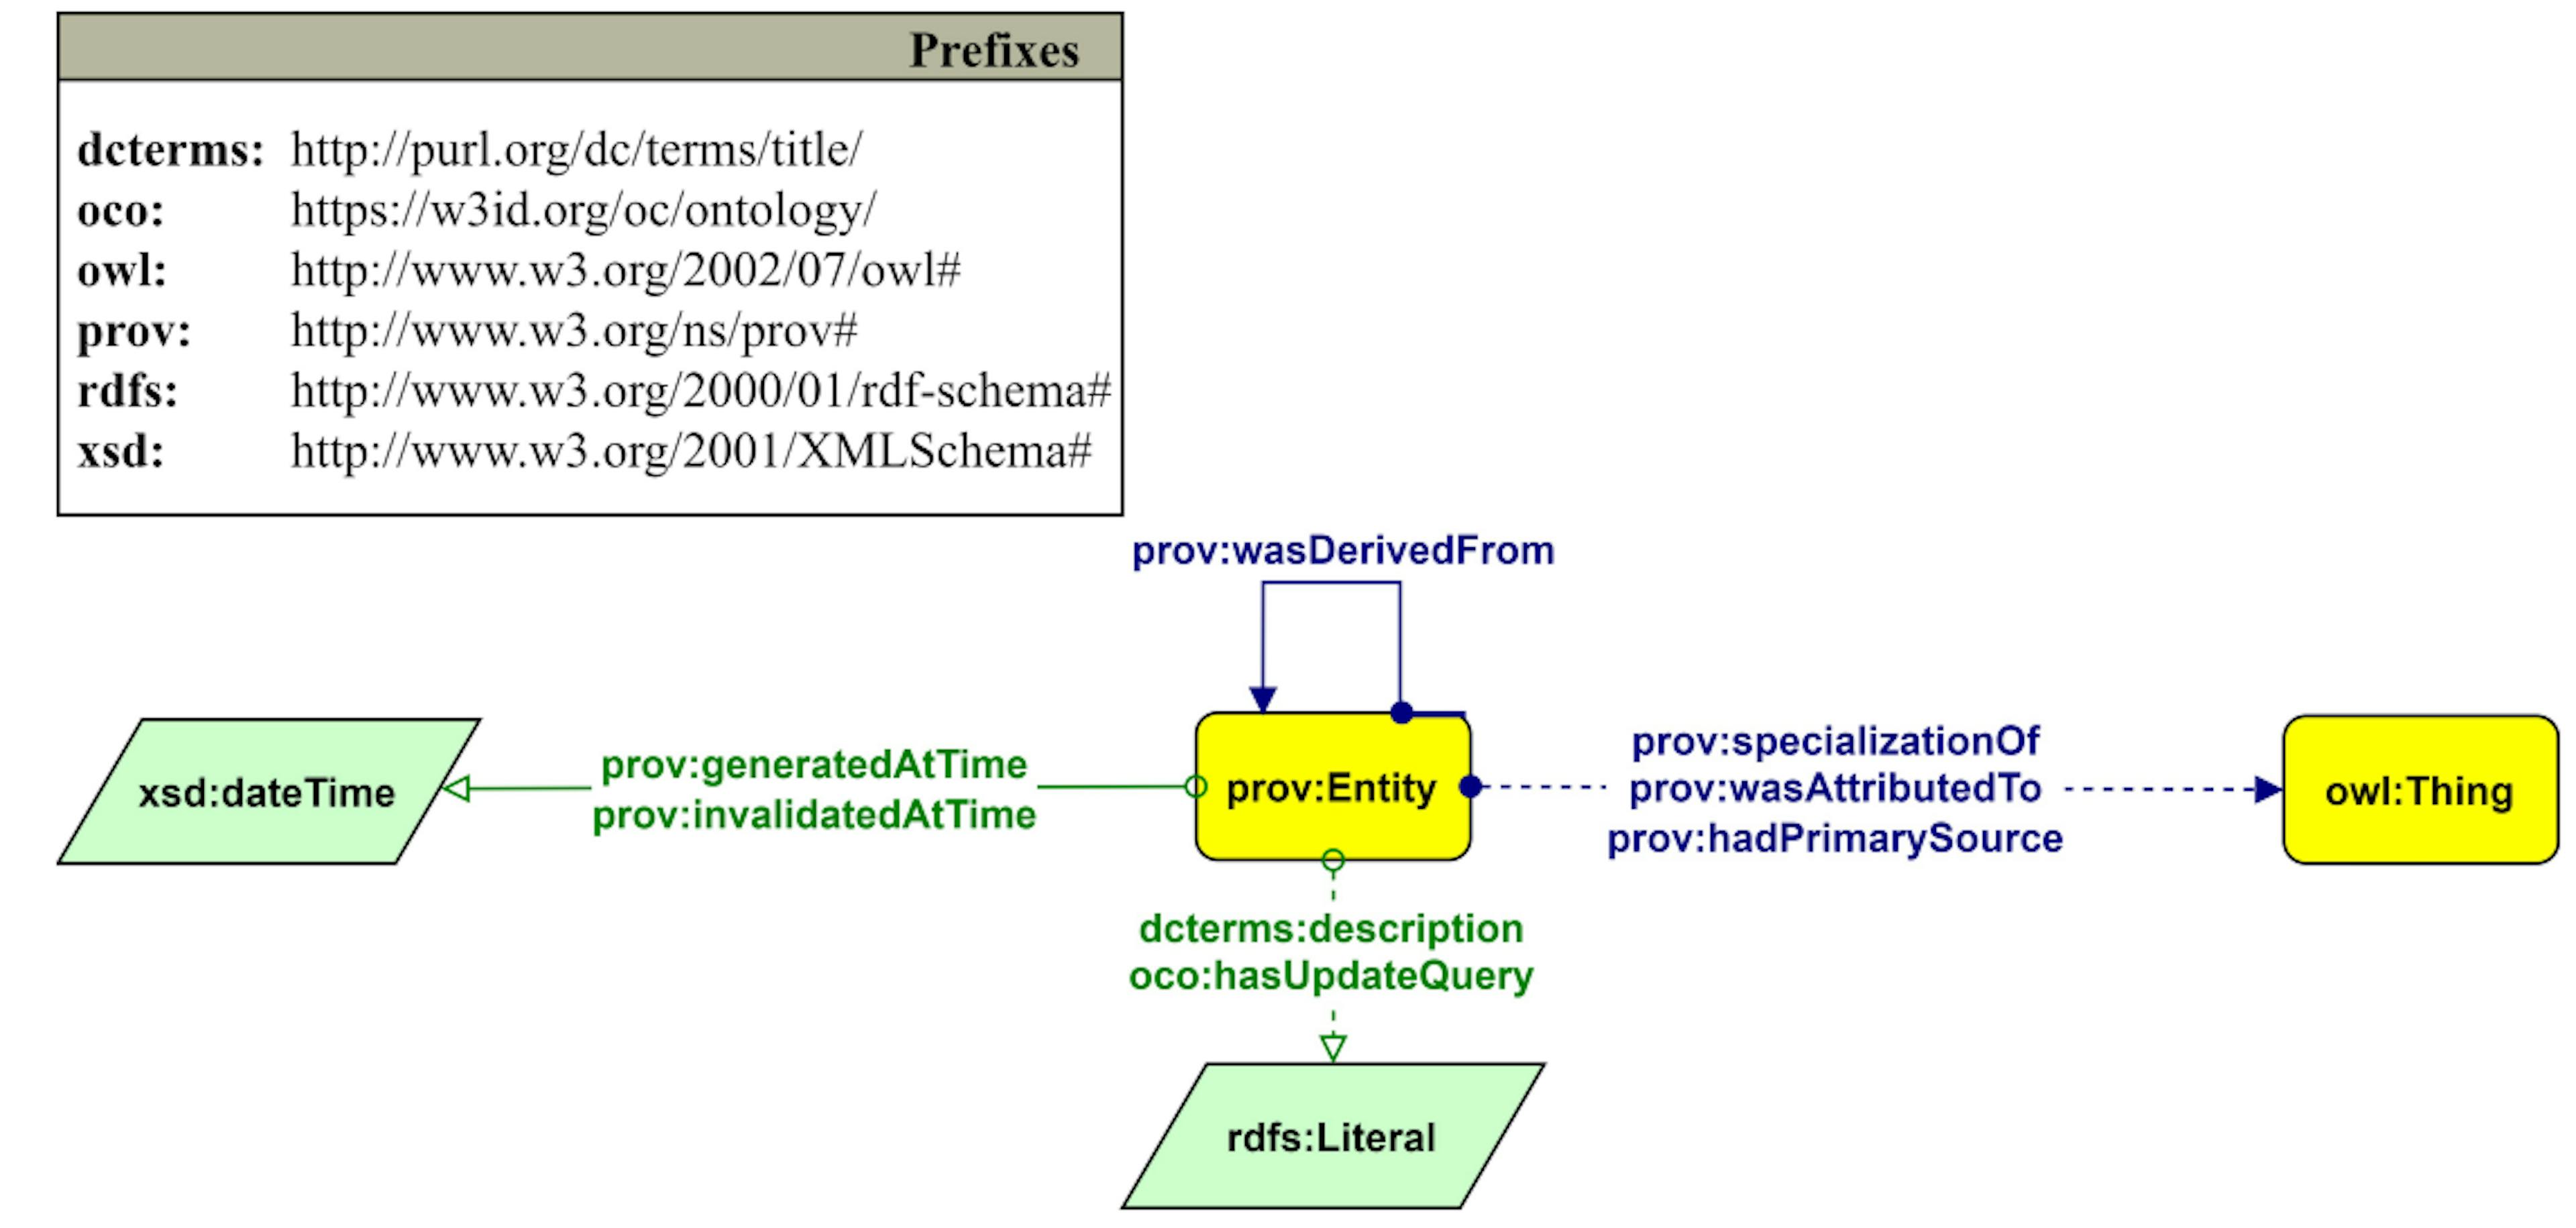 Figure 7: The Graffoo diagram describing snapshots (prov:Entity) of an entity (linked via prov:specializationOf) and the related provenance information